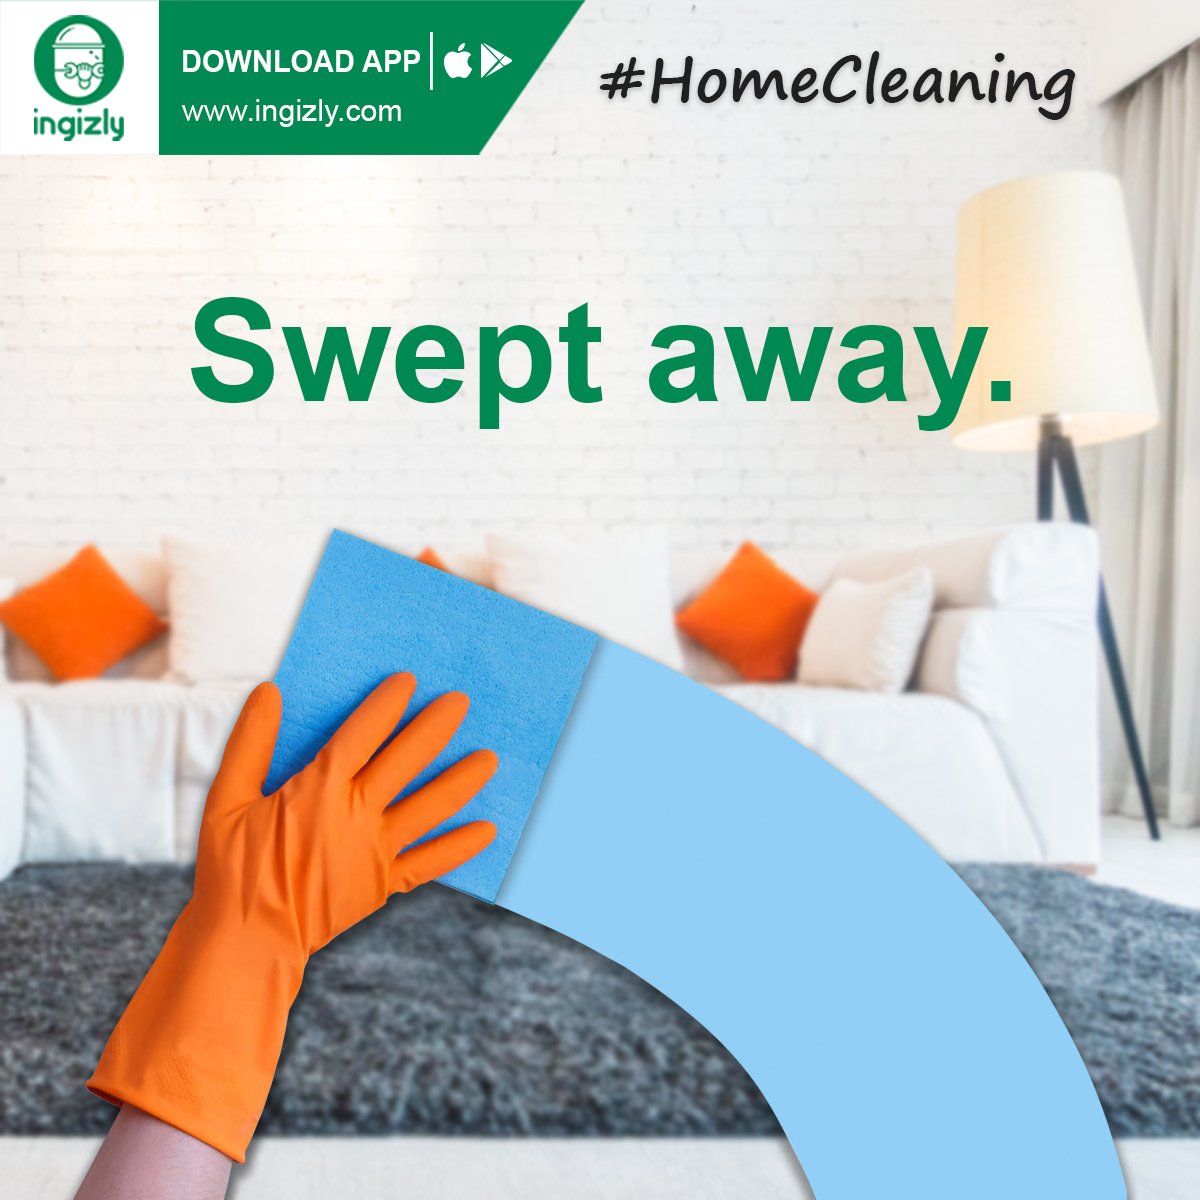 Your clean home is our business. 😉👍
.
For inquiry, Call or WhatsApp: bit.ly/2yOO8f9
+971 567818175 / +971 567298610
Visit our website to find out more bit.ly/2G7Bqdm
.
#Ingizly #Cleaning #CleaningServicesDubai #DubaiCleaners #HomeCleaningDubai #Dubai #UAE